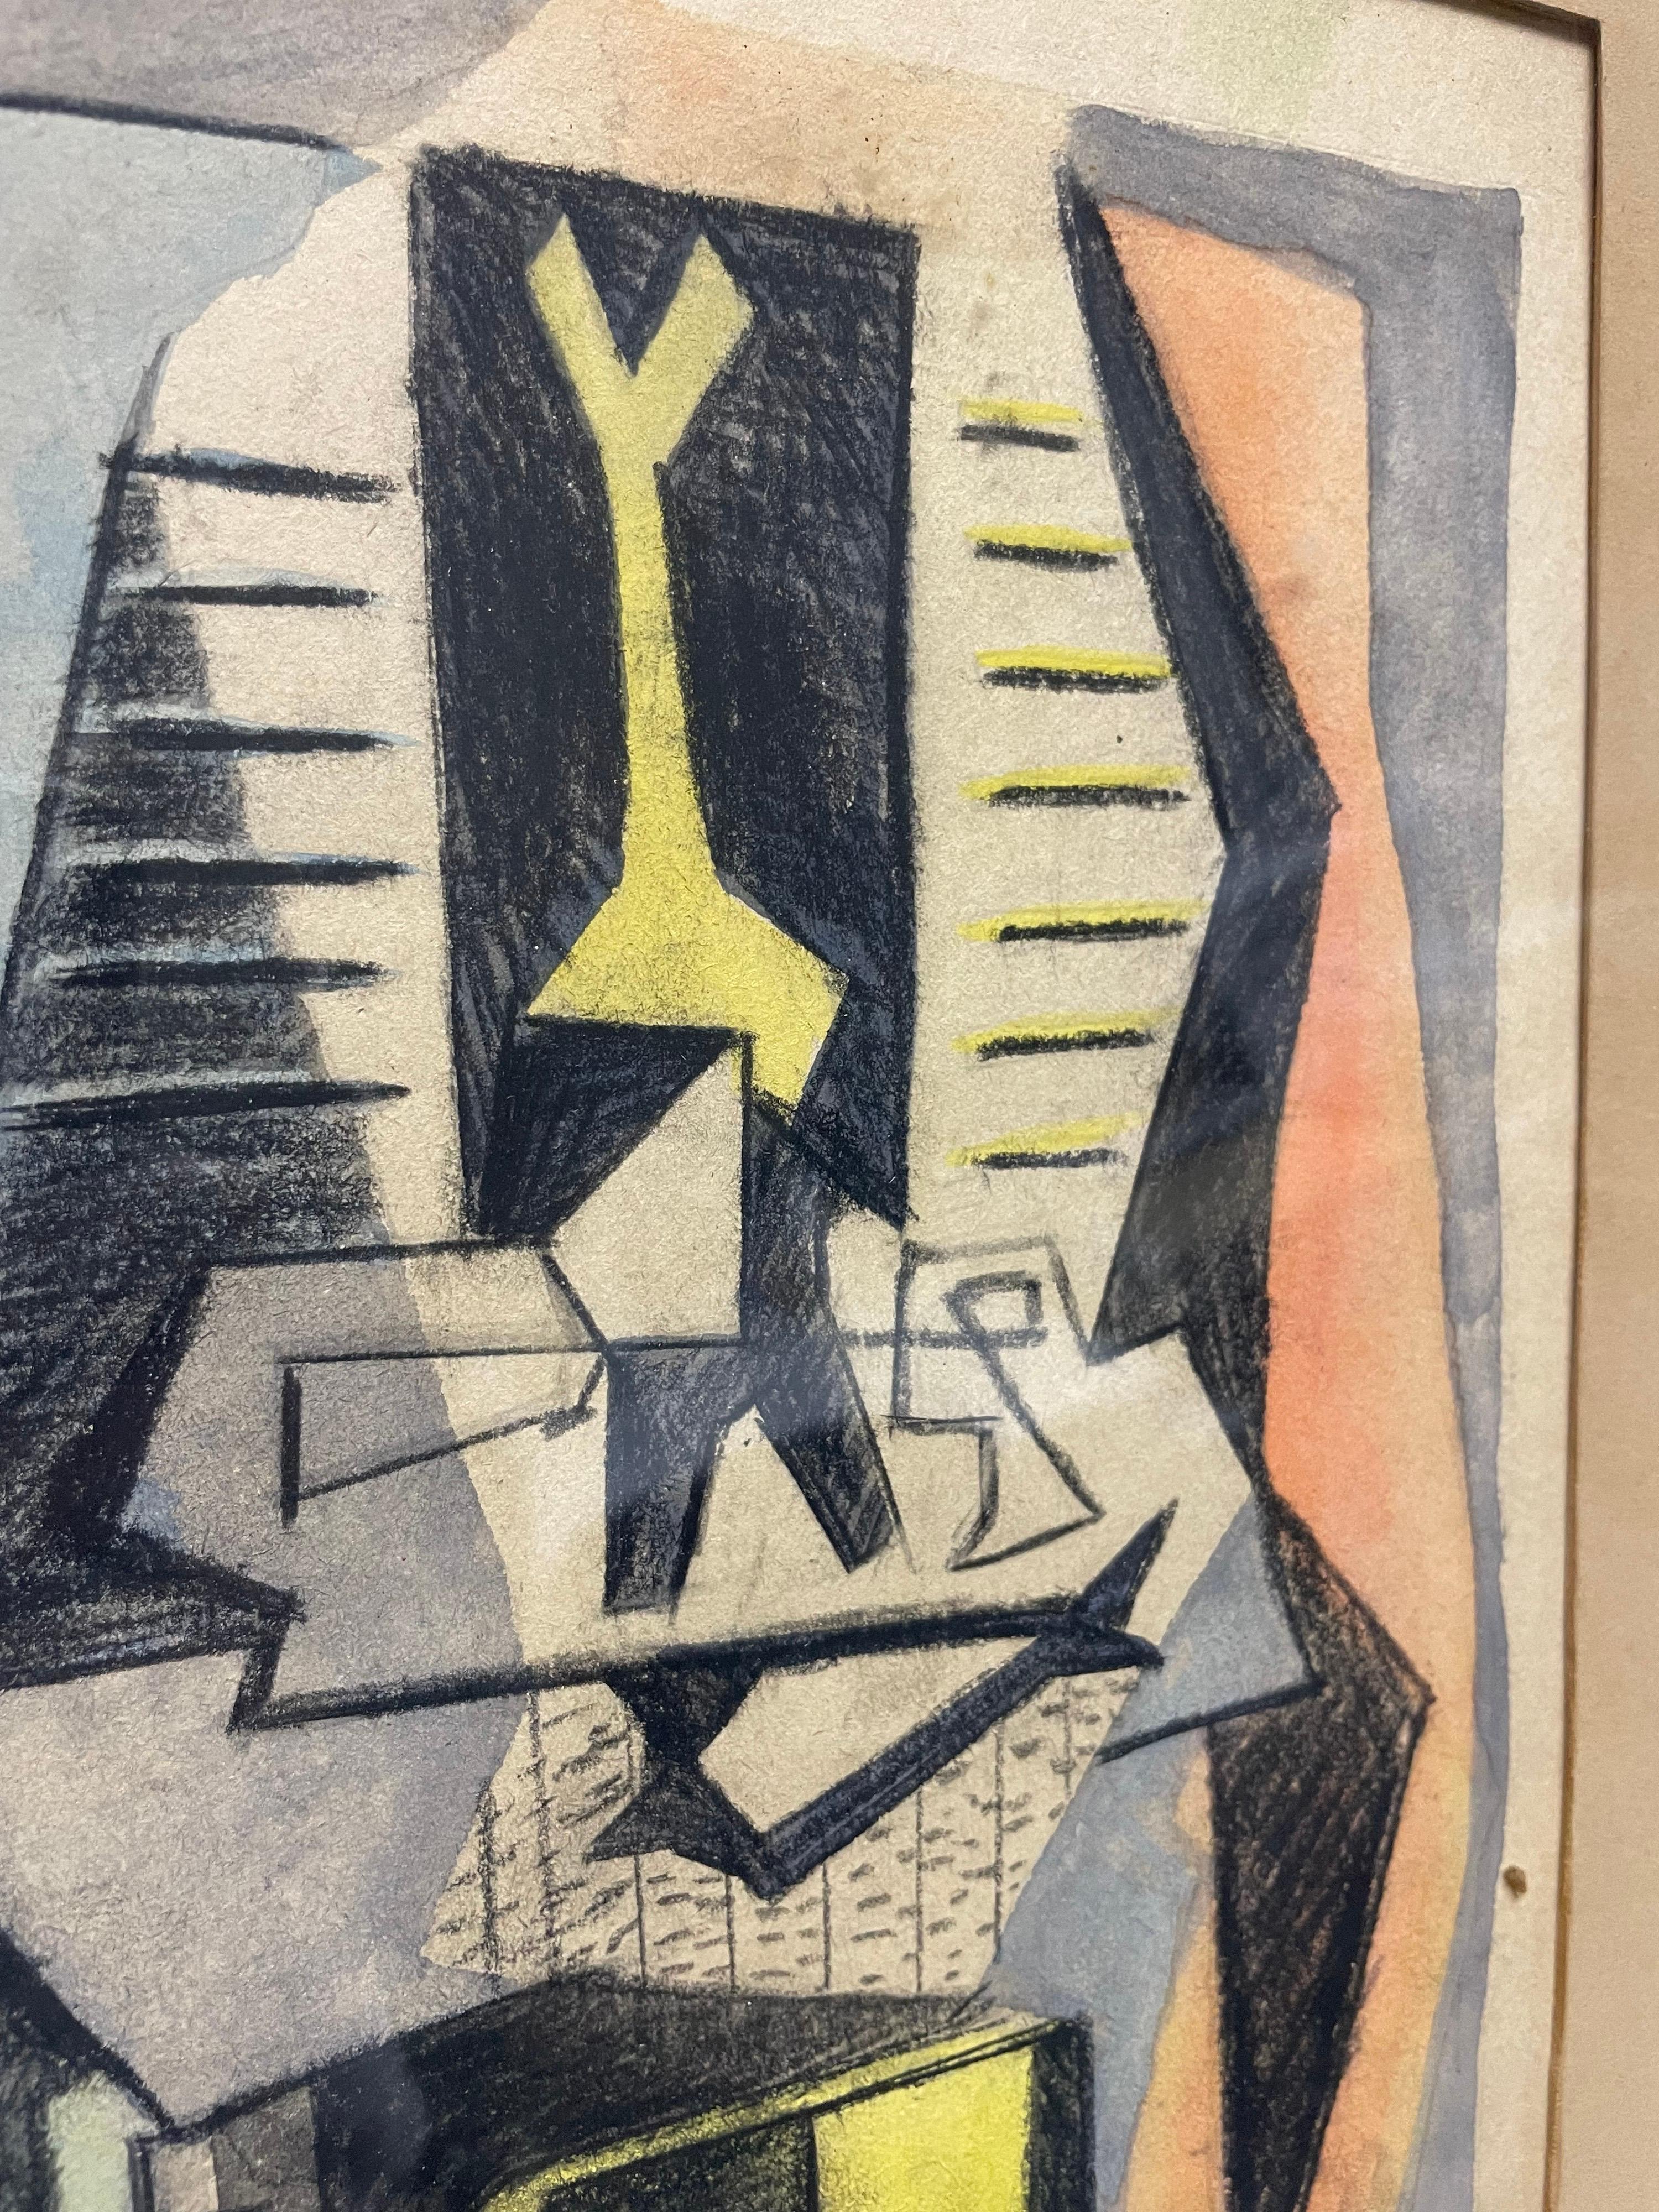 picasso before cubism